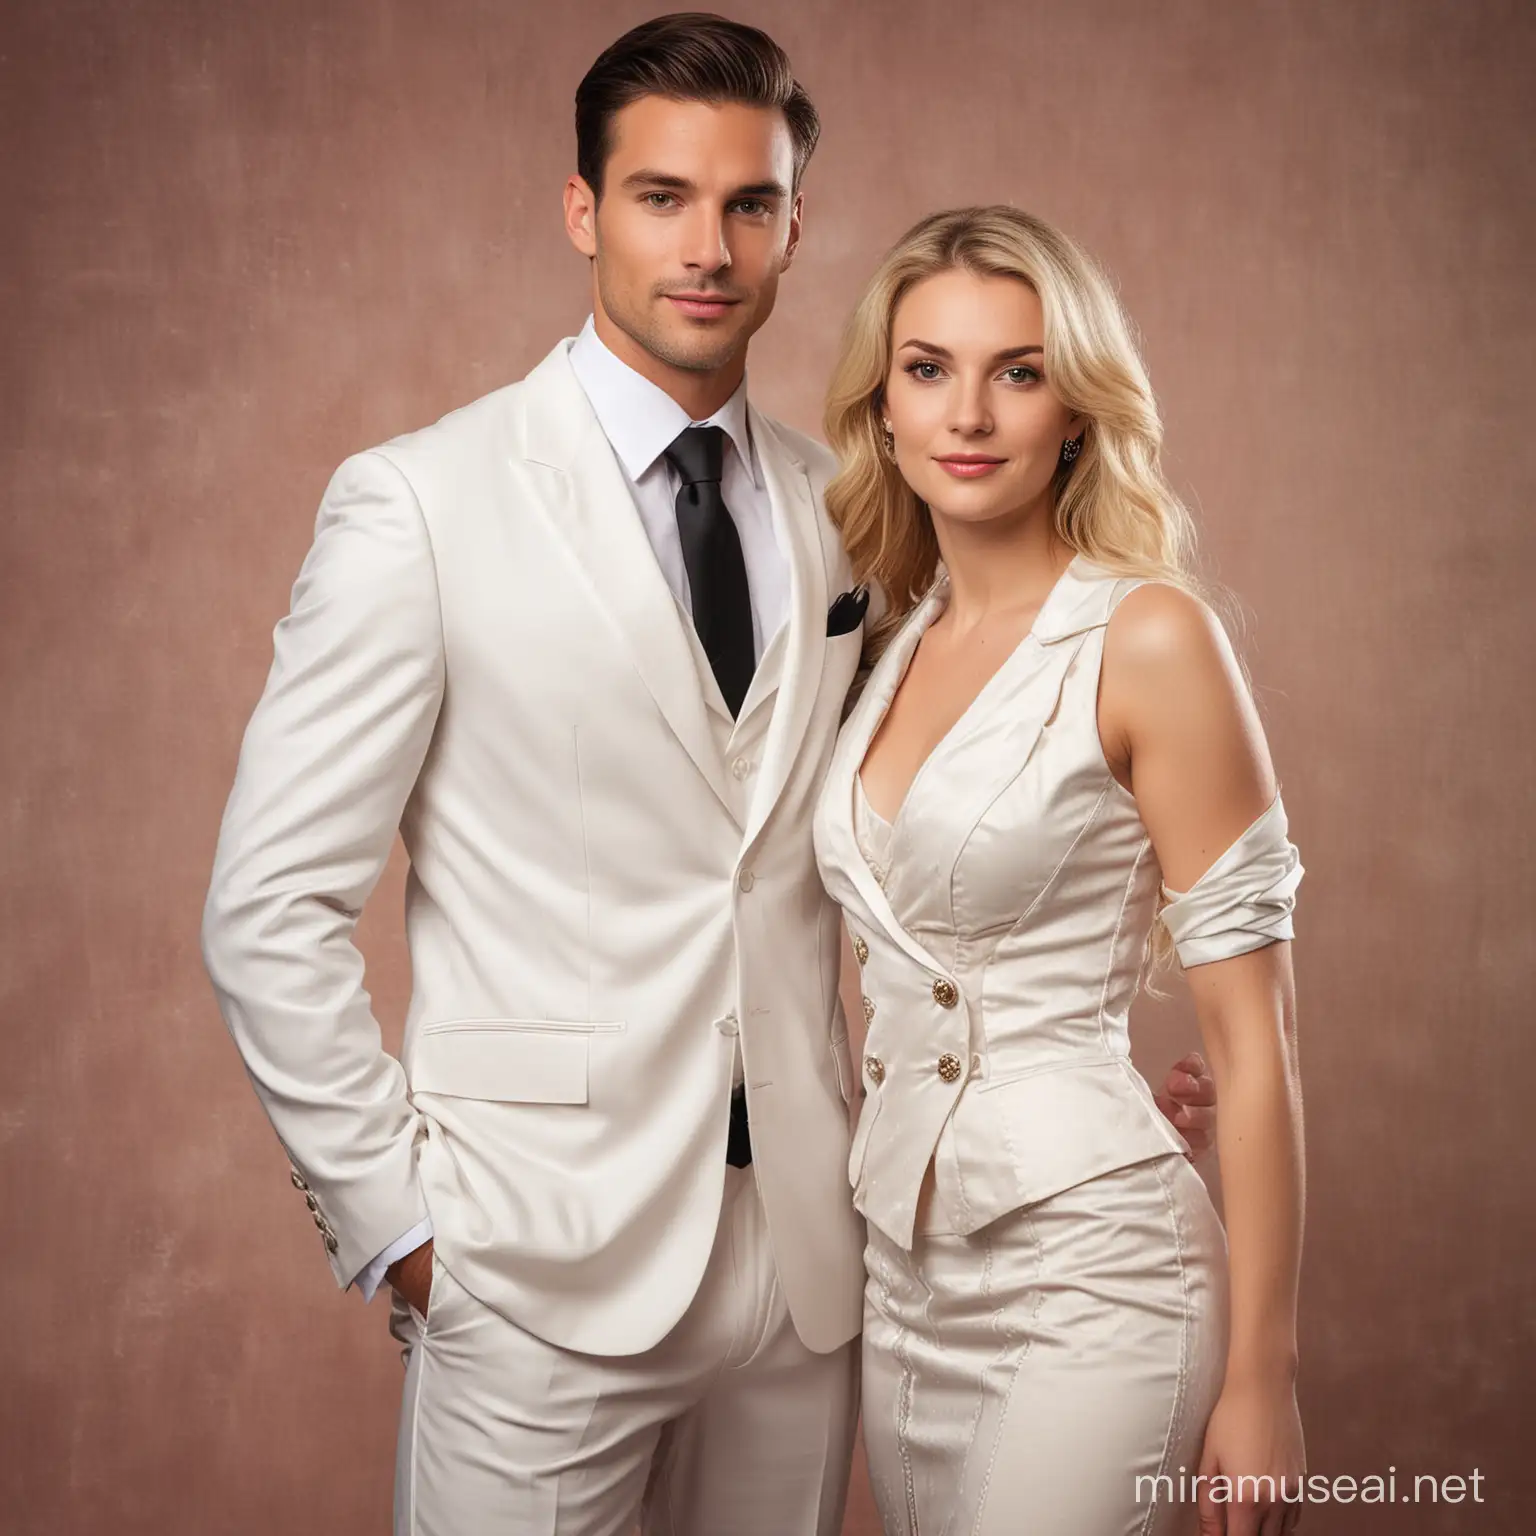 a beautiful white women dressed in a fancy dress holding a handsome white man dressed in suit. A rich theme as the background.